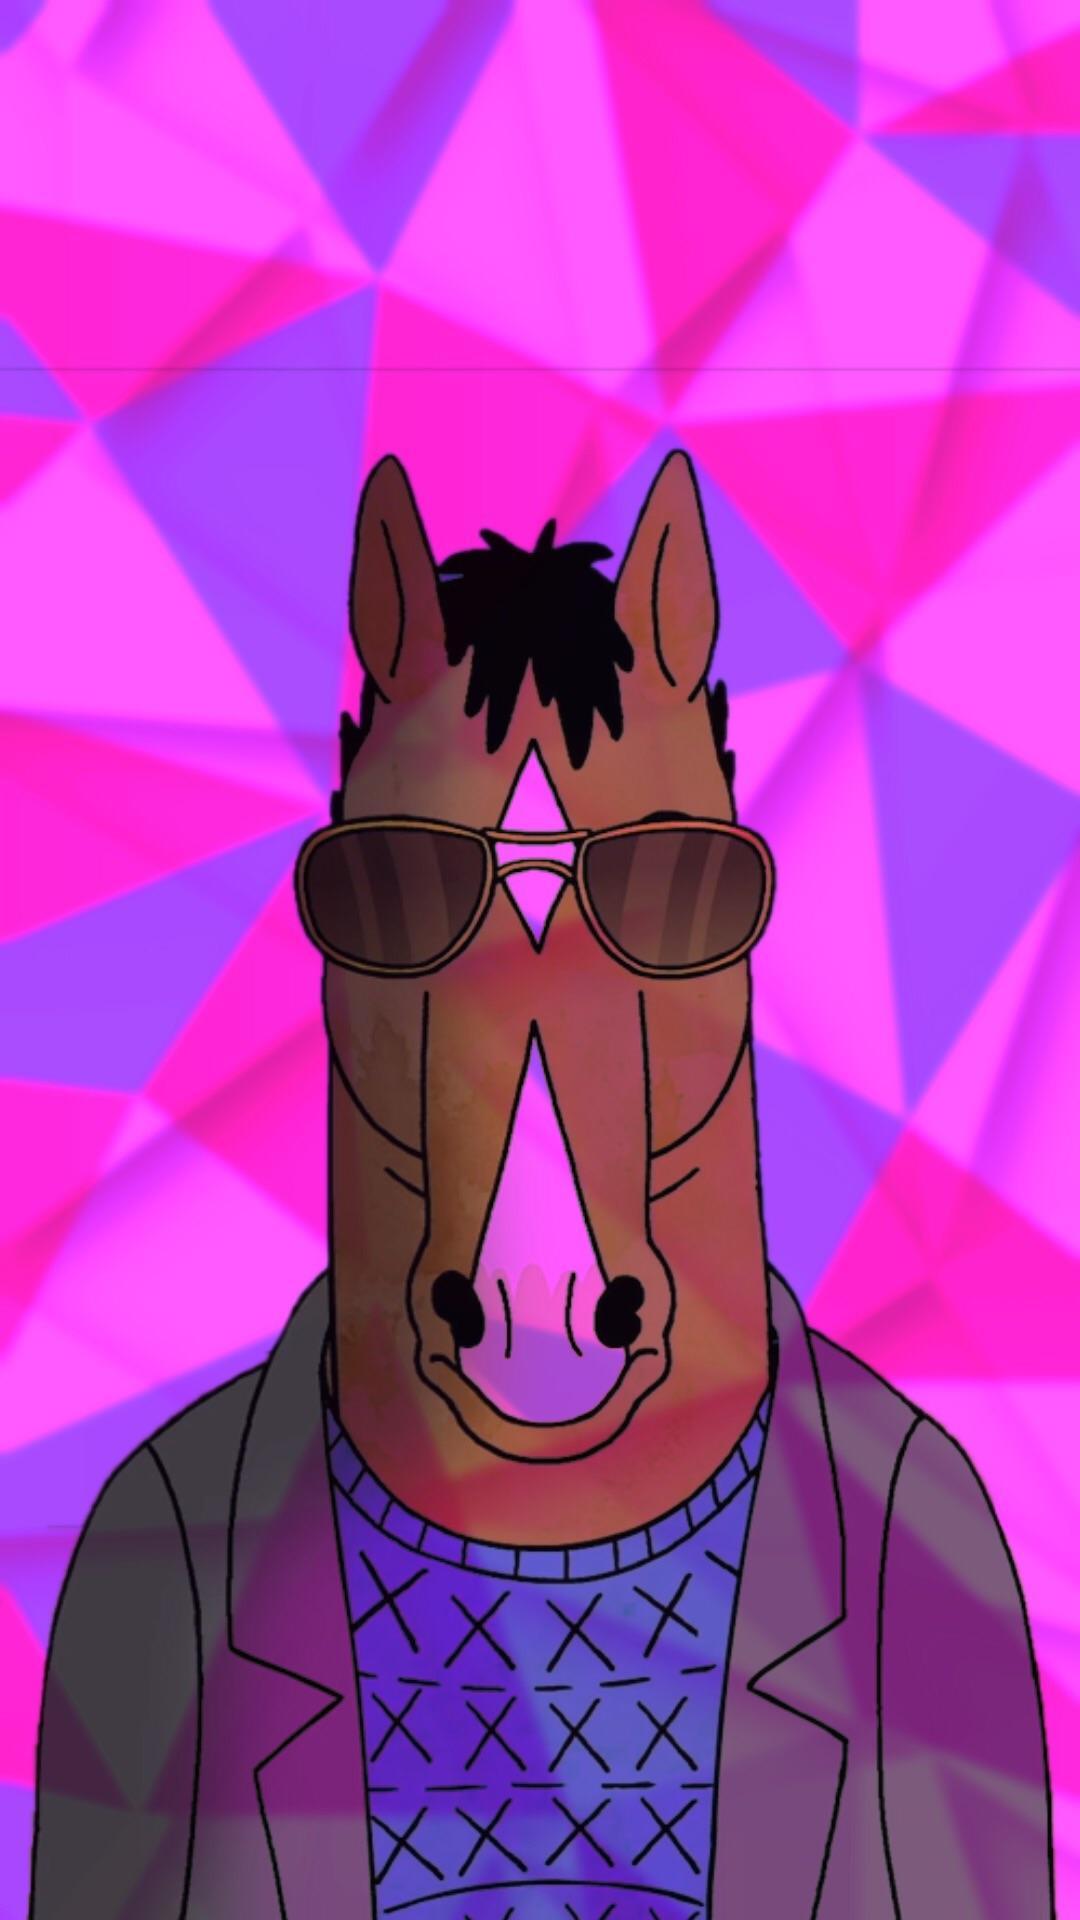 New Bojack Background I just made for my phone